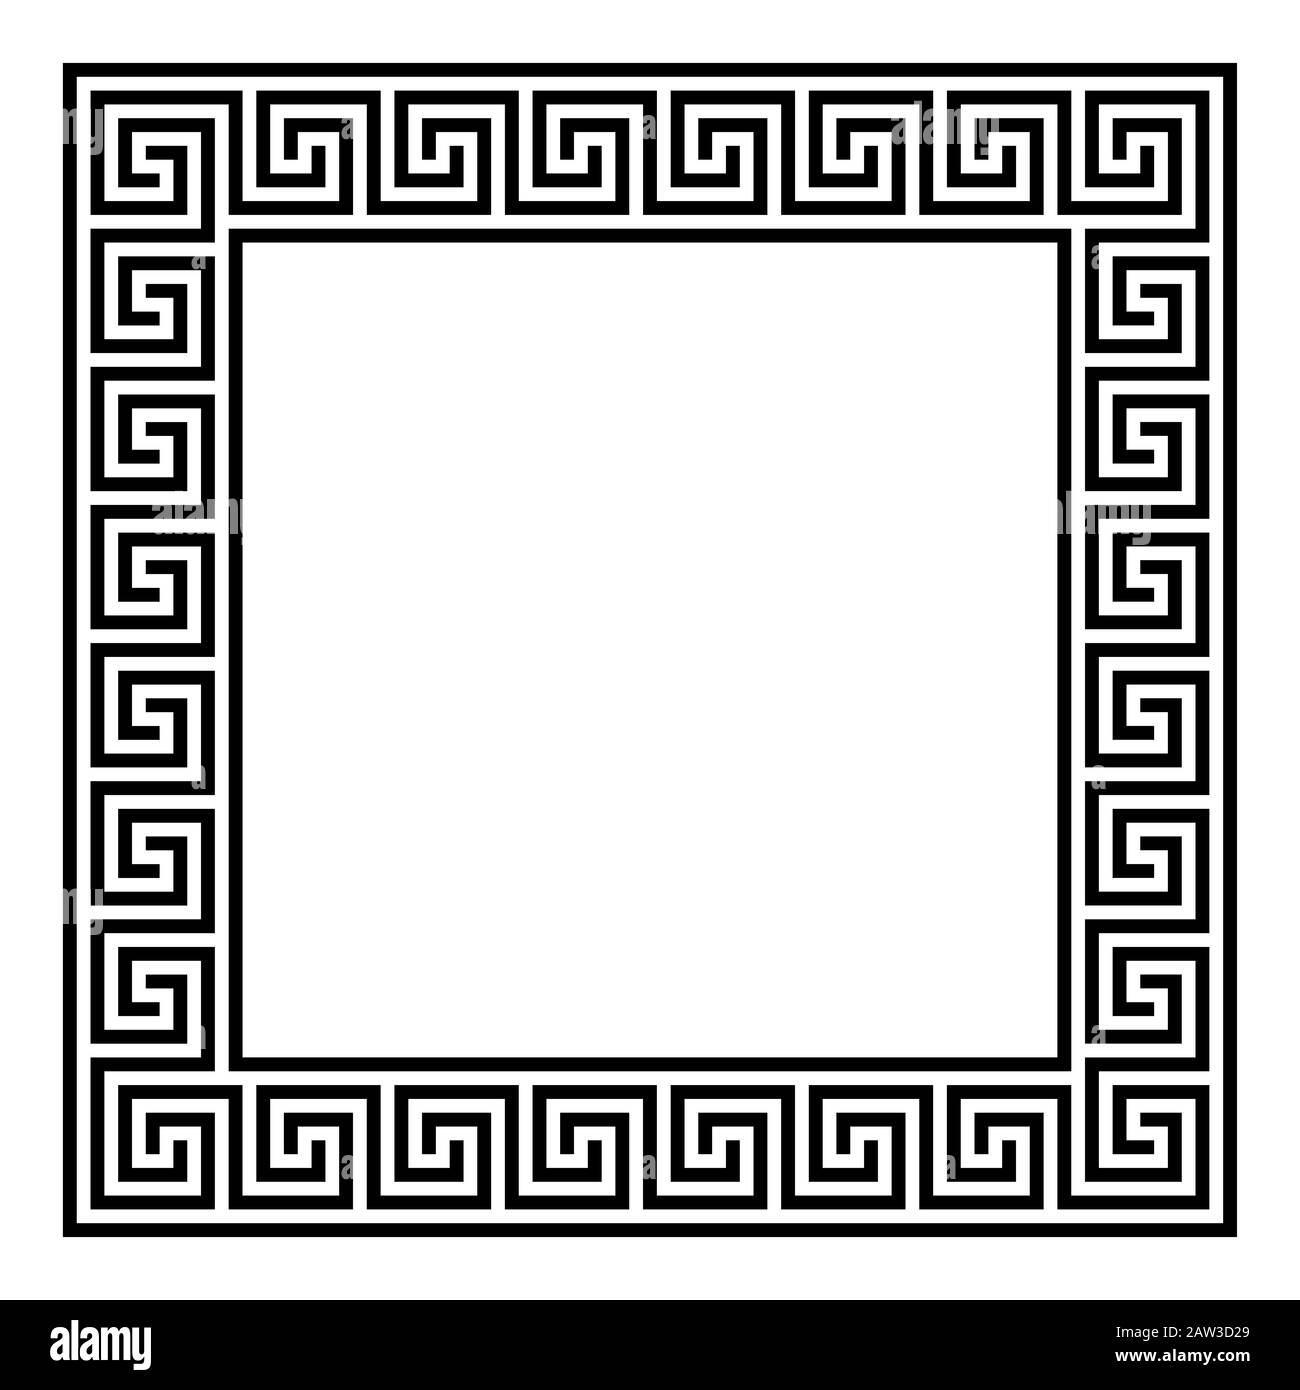 Square framed disconnected meander pattern made of seamless meanders. Meandros. Decorative border with interrupted lines, shaped into repeated motif. Stock Photo